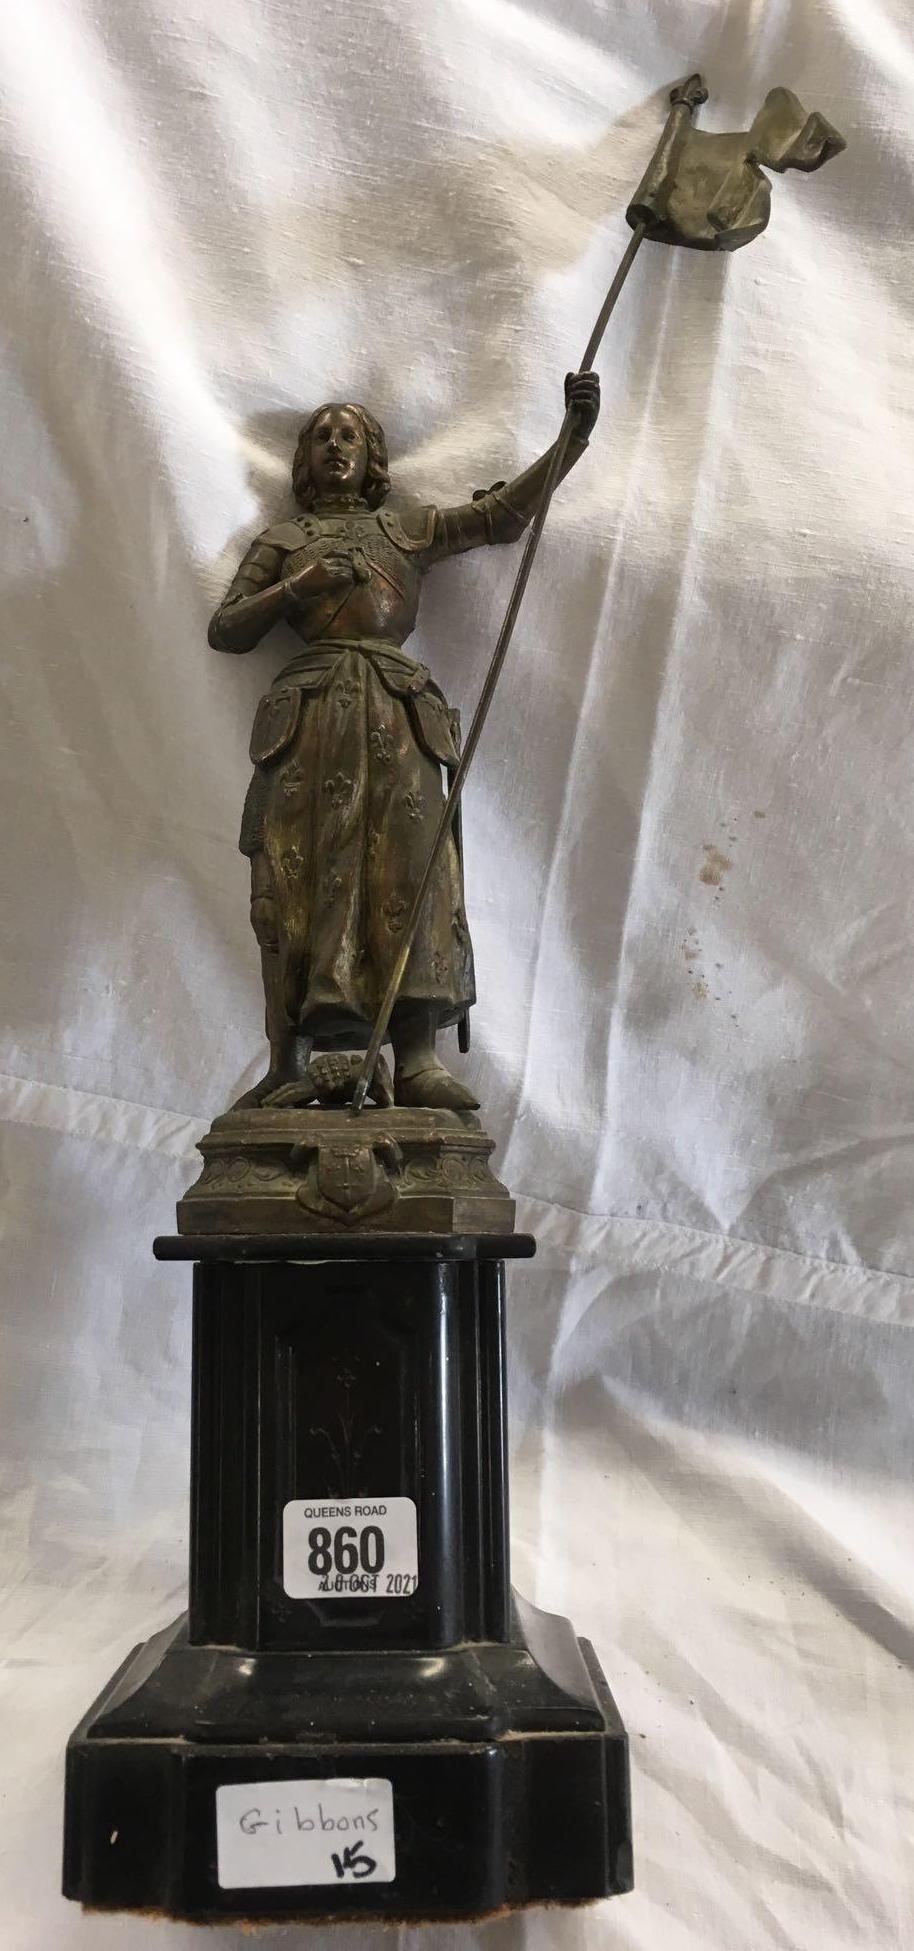 FIGURE OF JOAN OF ARC STANDING ON A MARBLE BASE